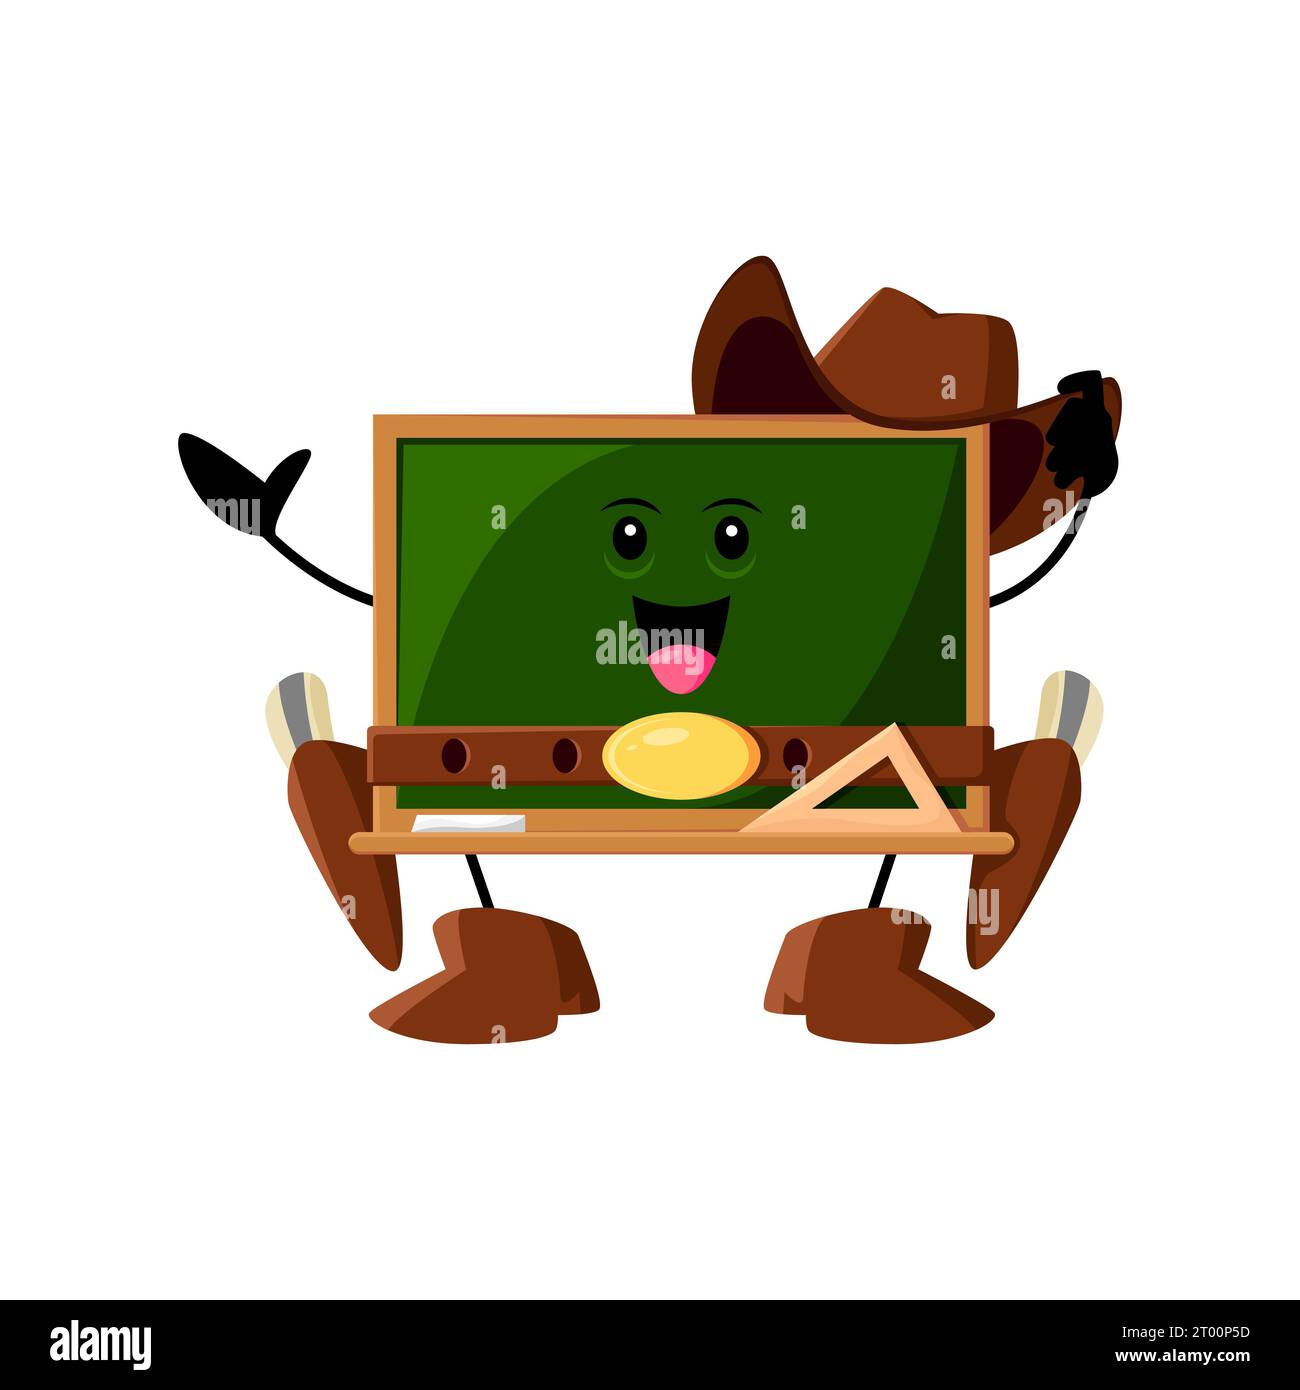 Cartoon blackboard school supply cowboy, ranger, sheriff and robber character. Isolated vector personage with a ten-gallon hat, boots, and guns, ready to wrangle knowledge on wild chalkboard frontier Stock Vector